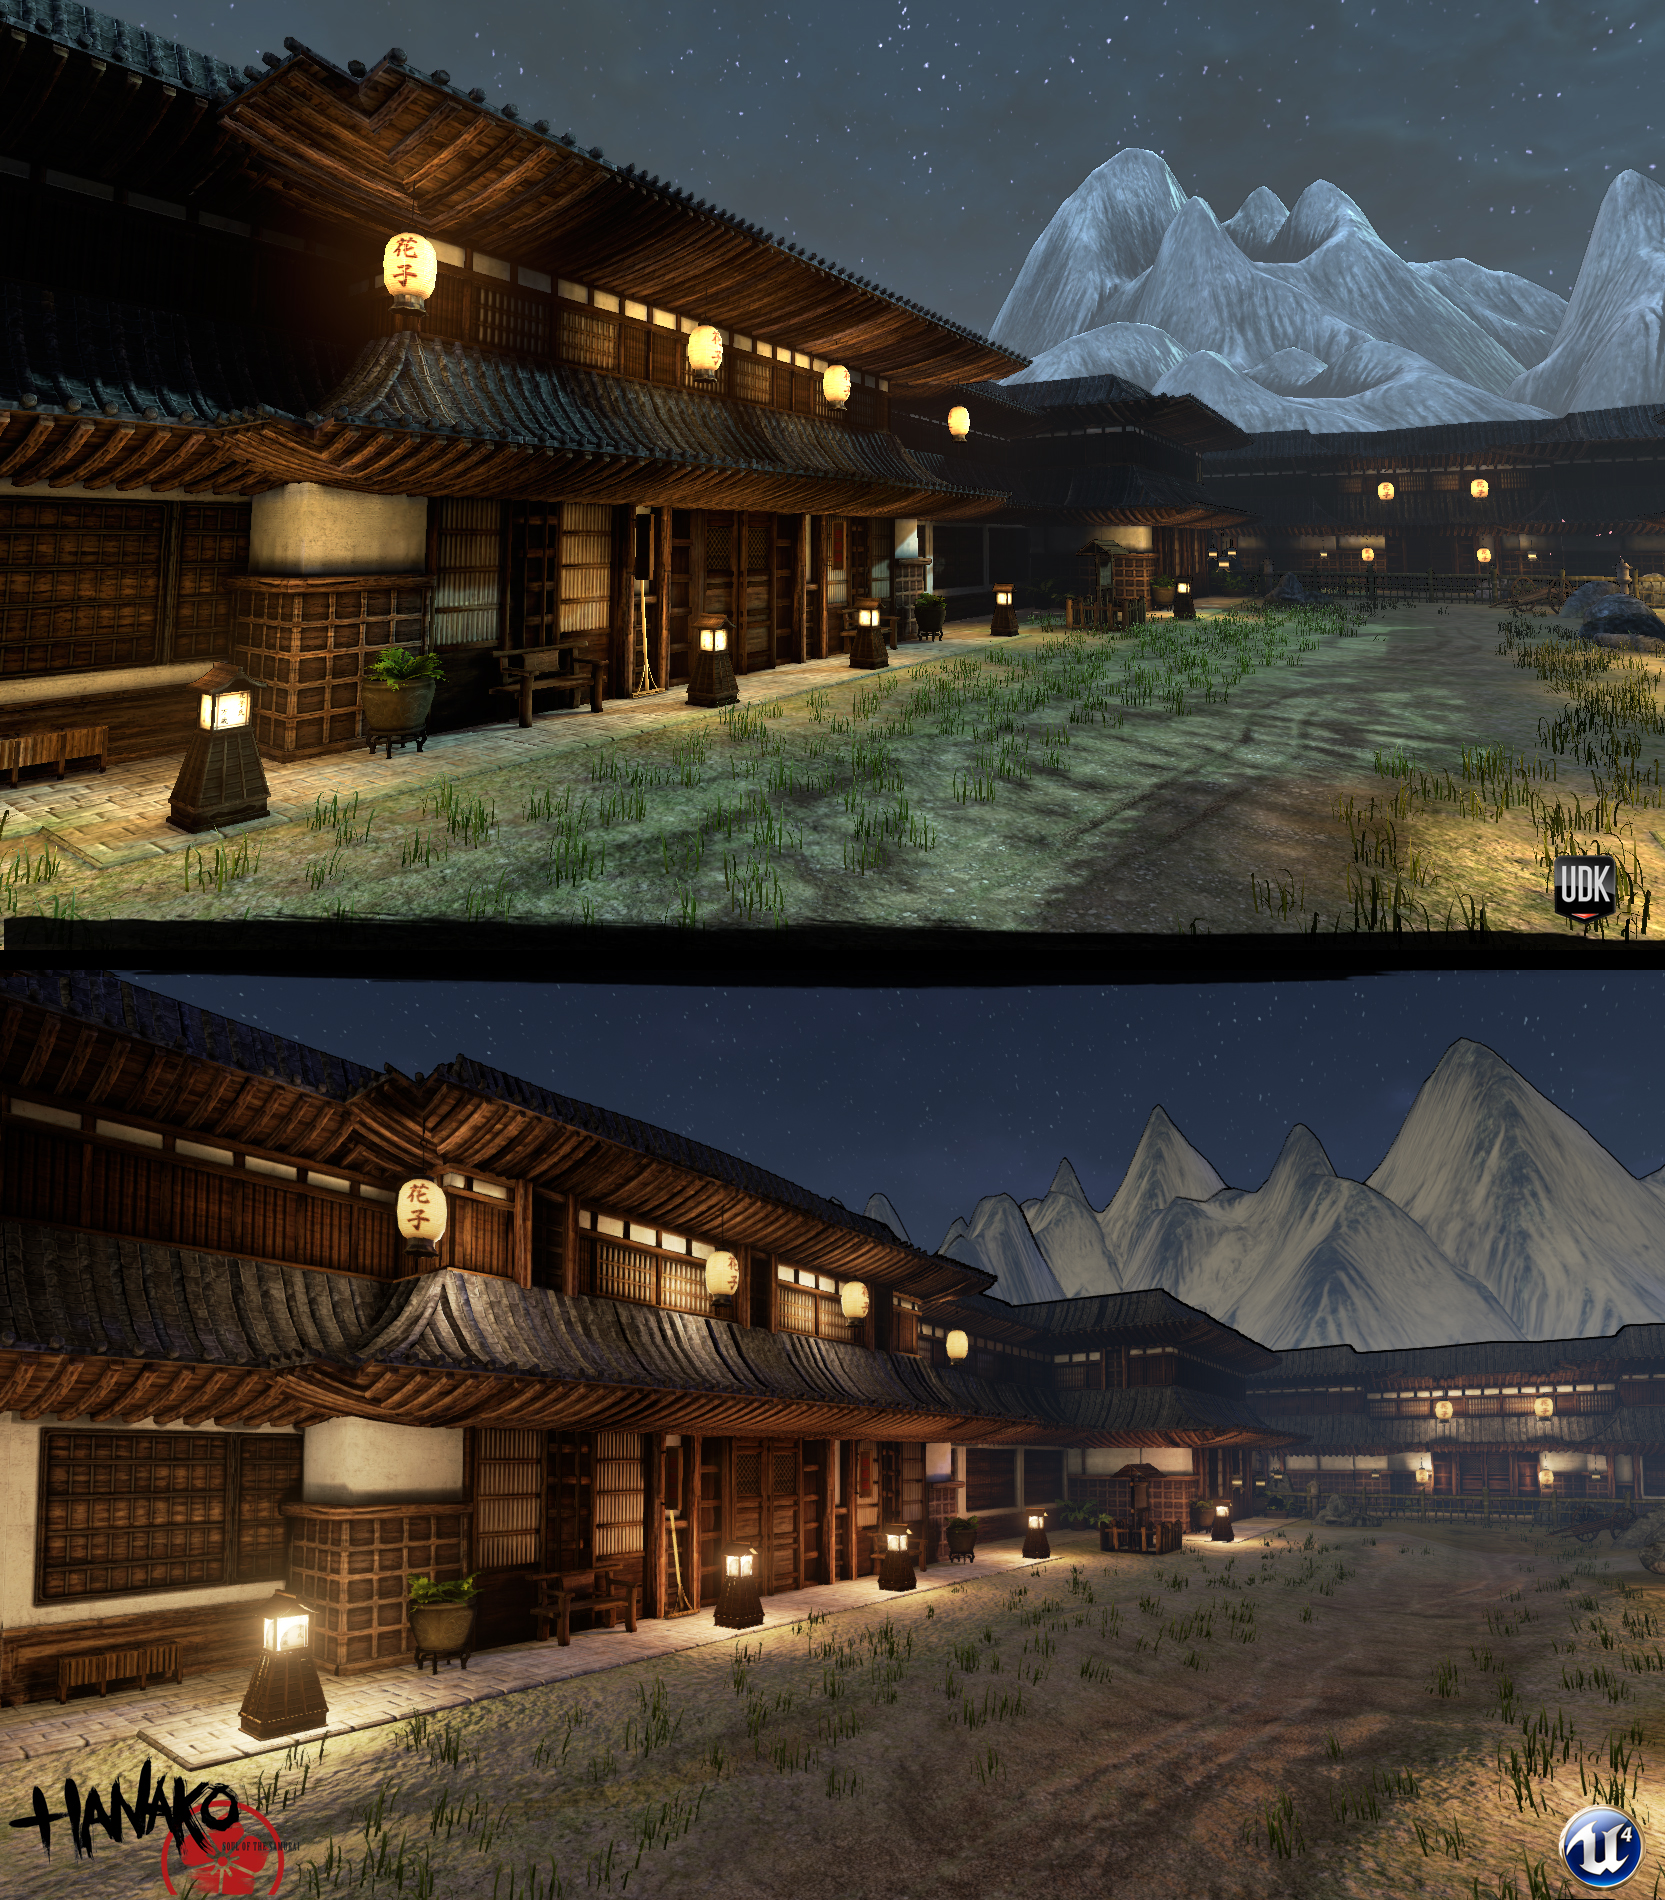 Hanako showing differences between UDK and UE4